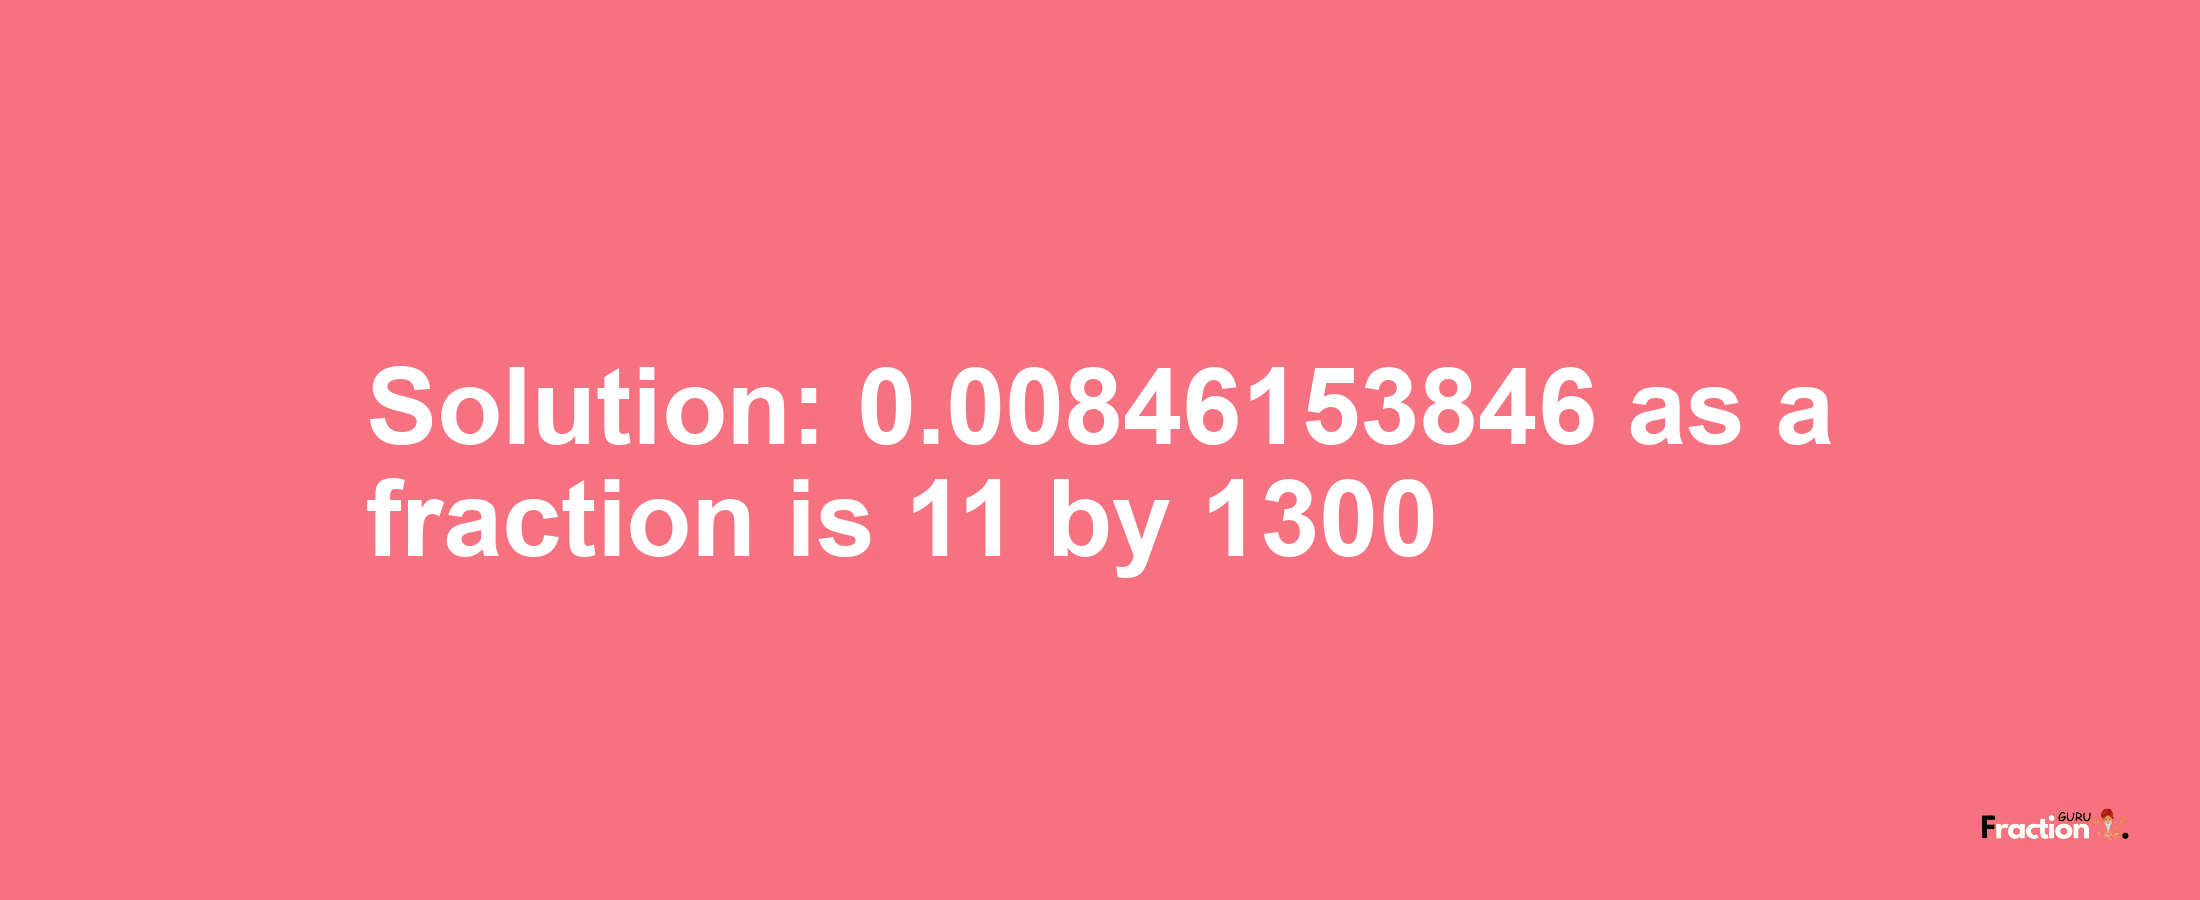 Solution:0.00846153846 as a fraction is 11/1300